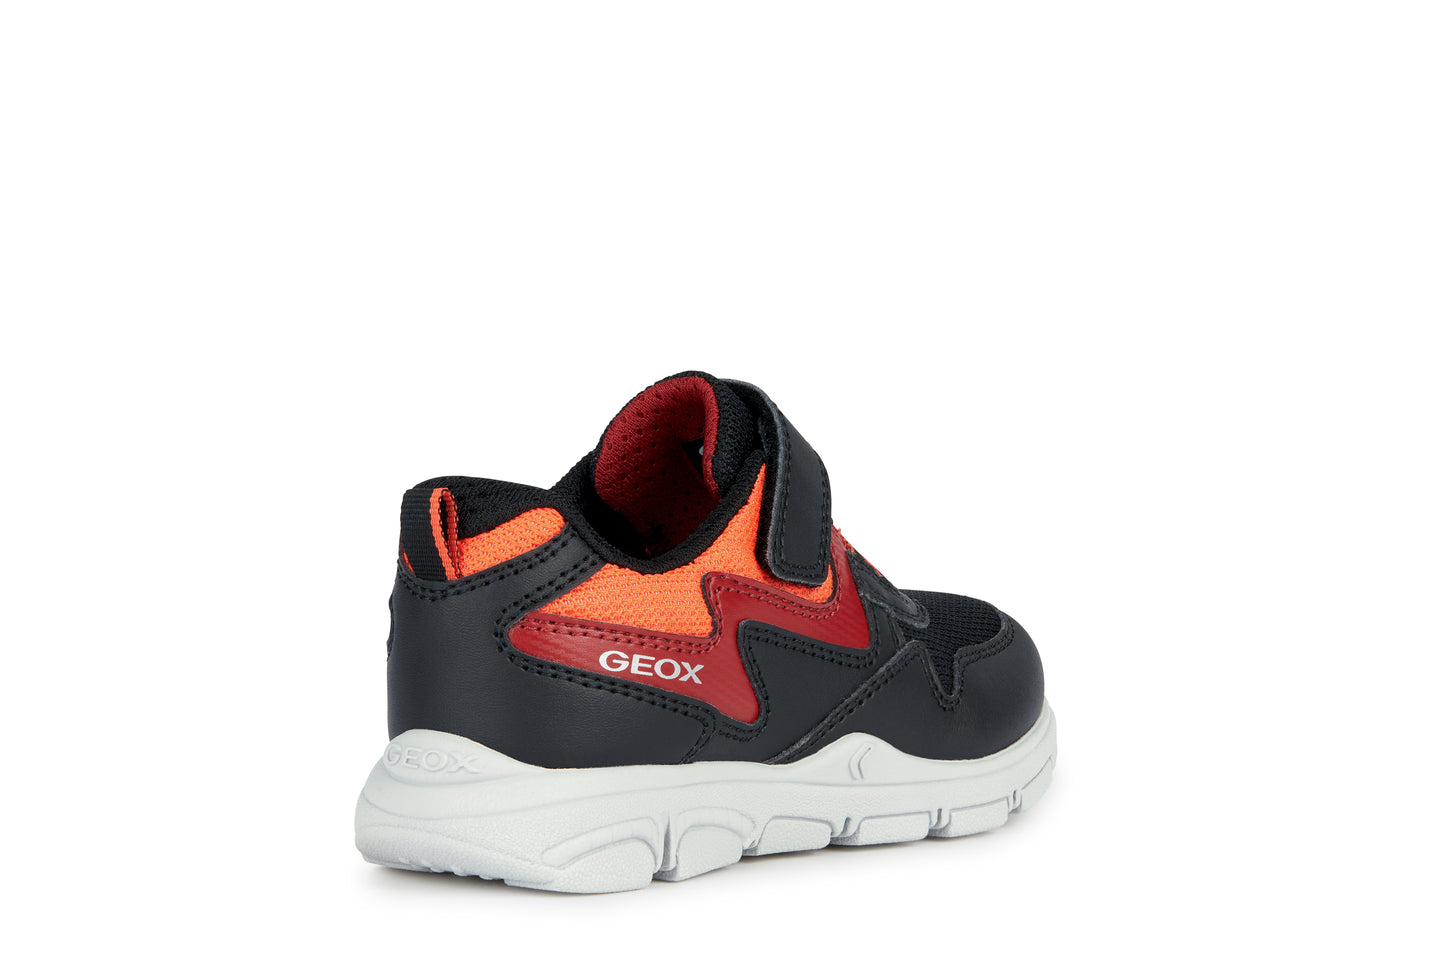 A boys trainer by Geox, style New Torque, in black, red and orange with a velcro strap and bungee laces. Rear outer side view.